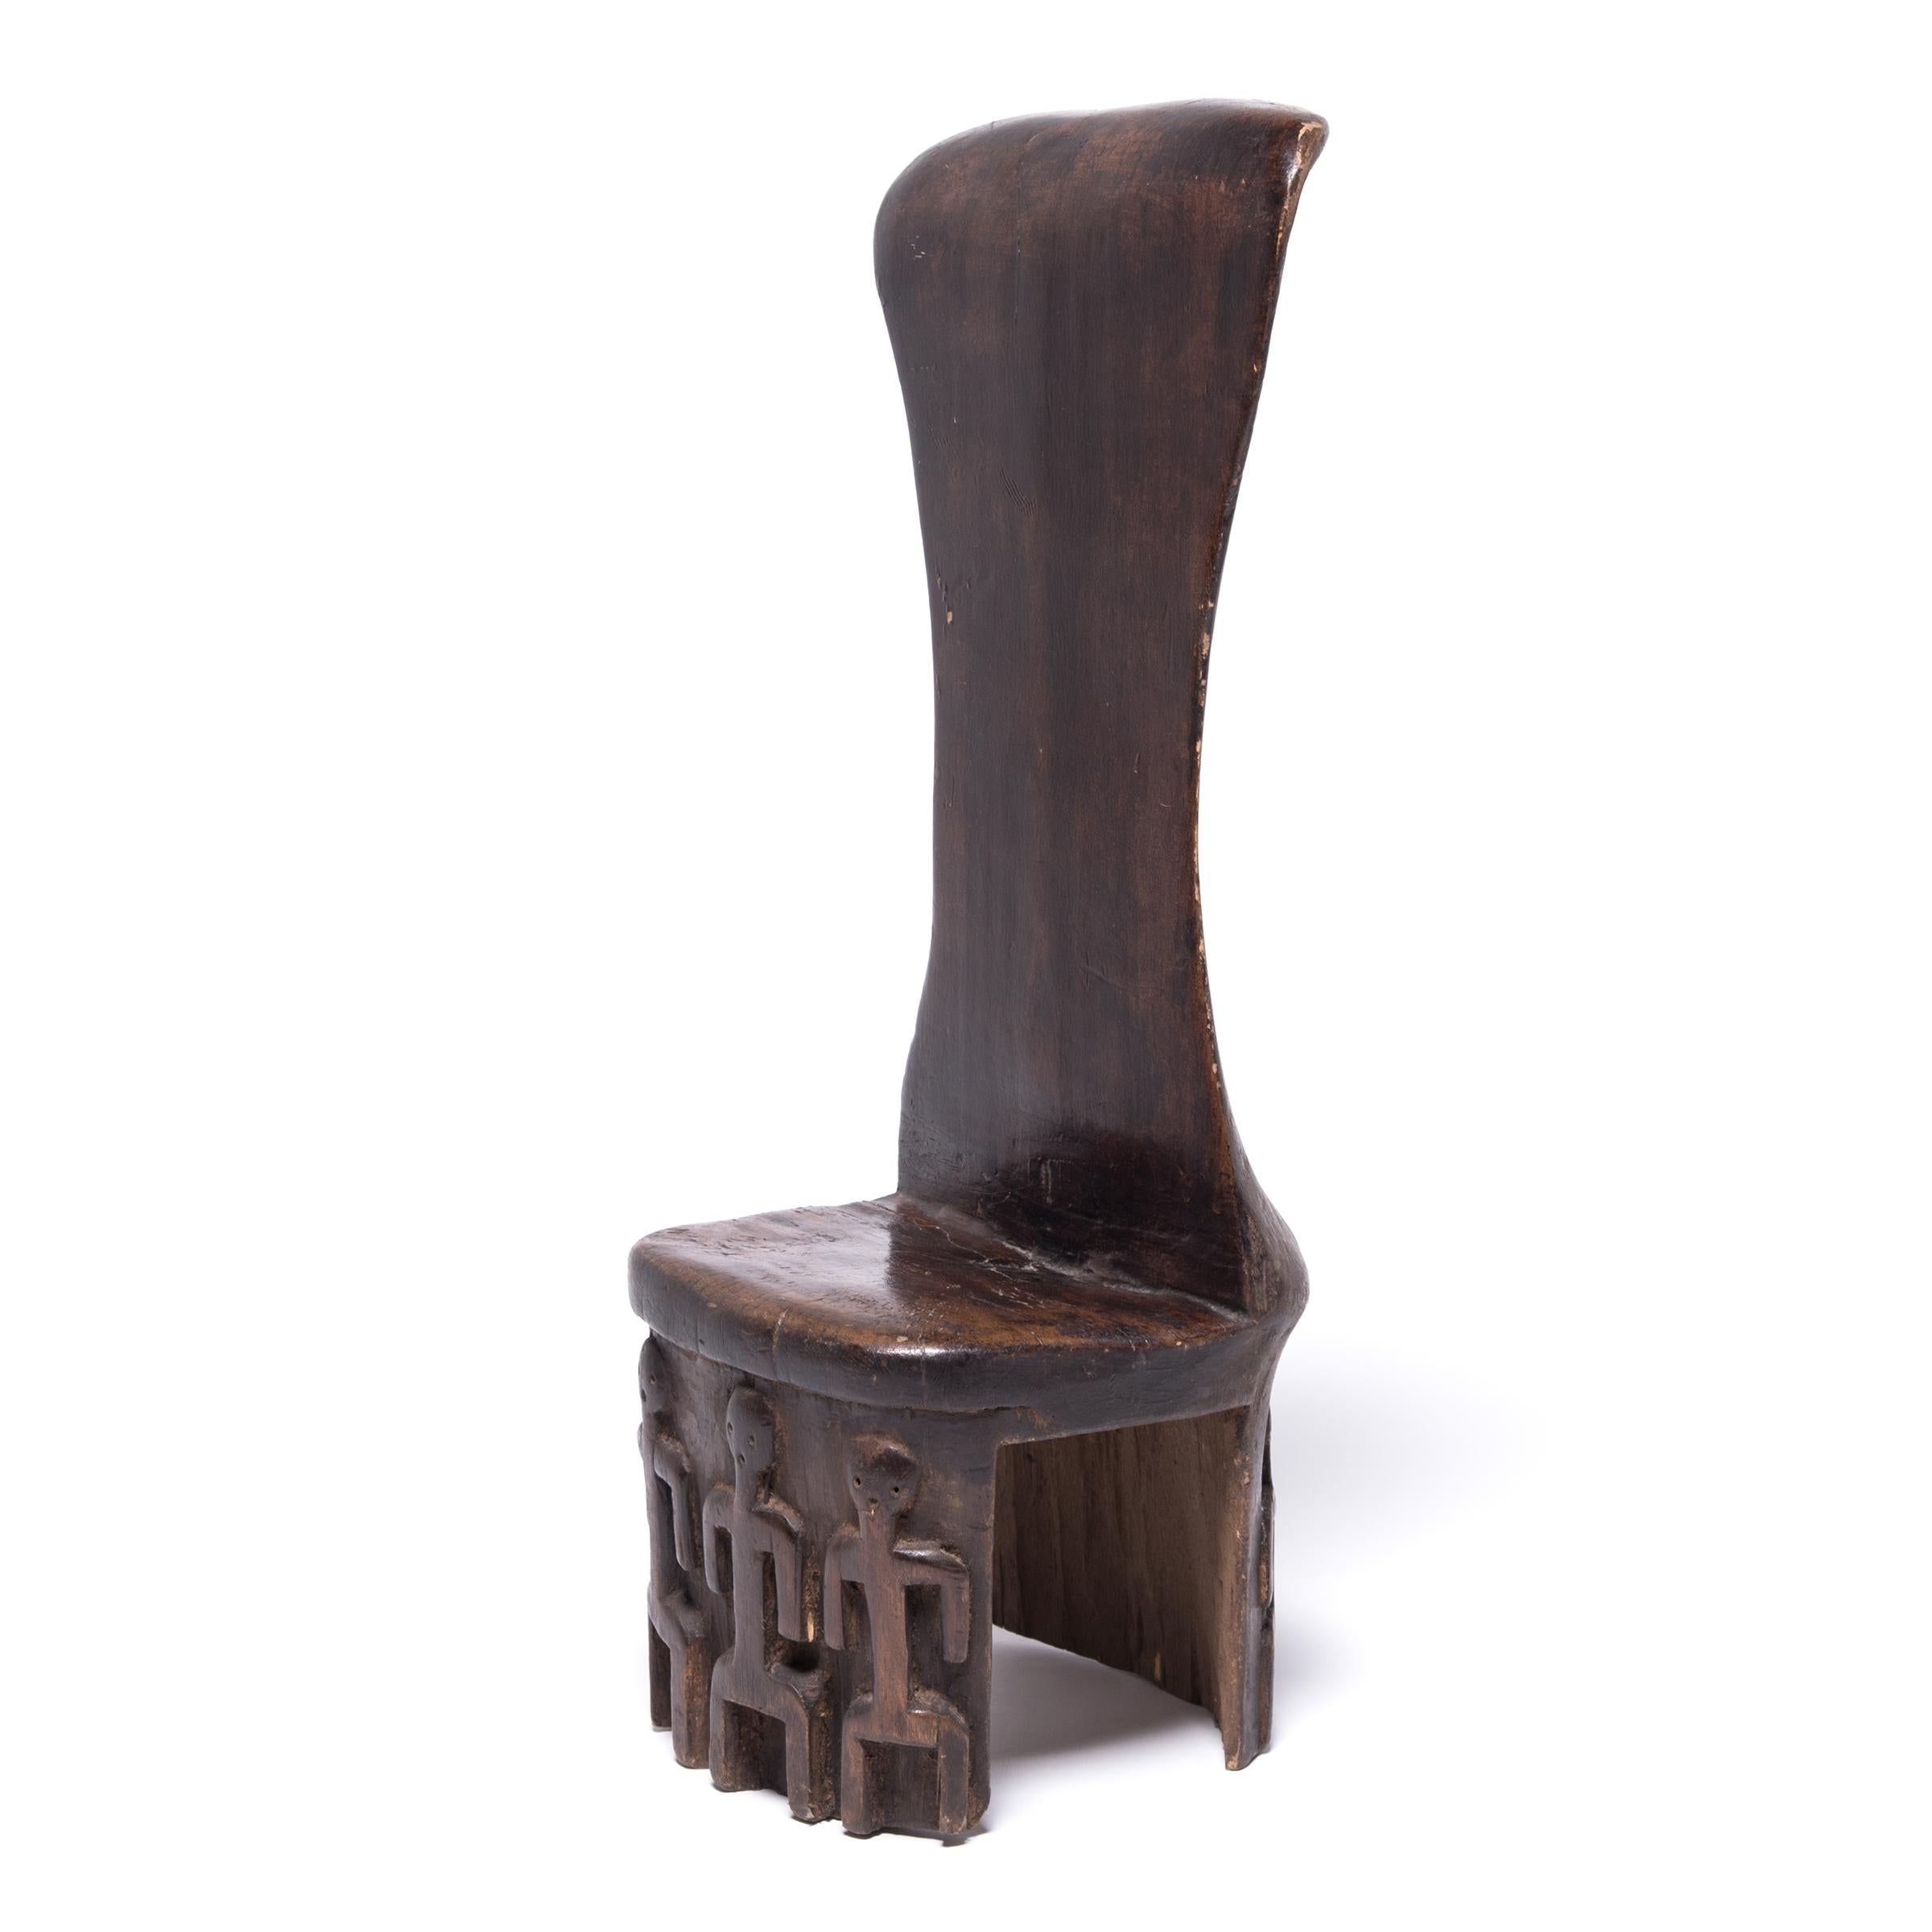 Noted for its individualistic, egalitarian, and progressive society, the Baule of Cote D'Ivoire were master craftspeople. This chair features their characteristically well polished woodworking style. The individuals at the base suggest a community